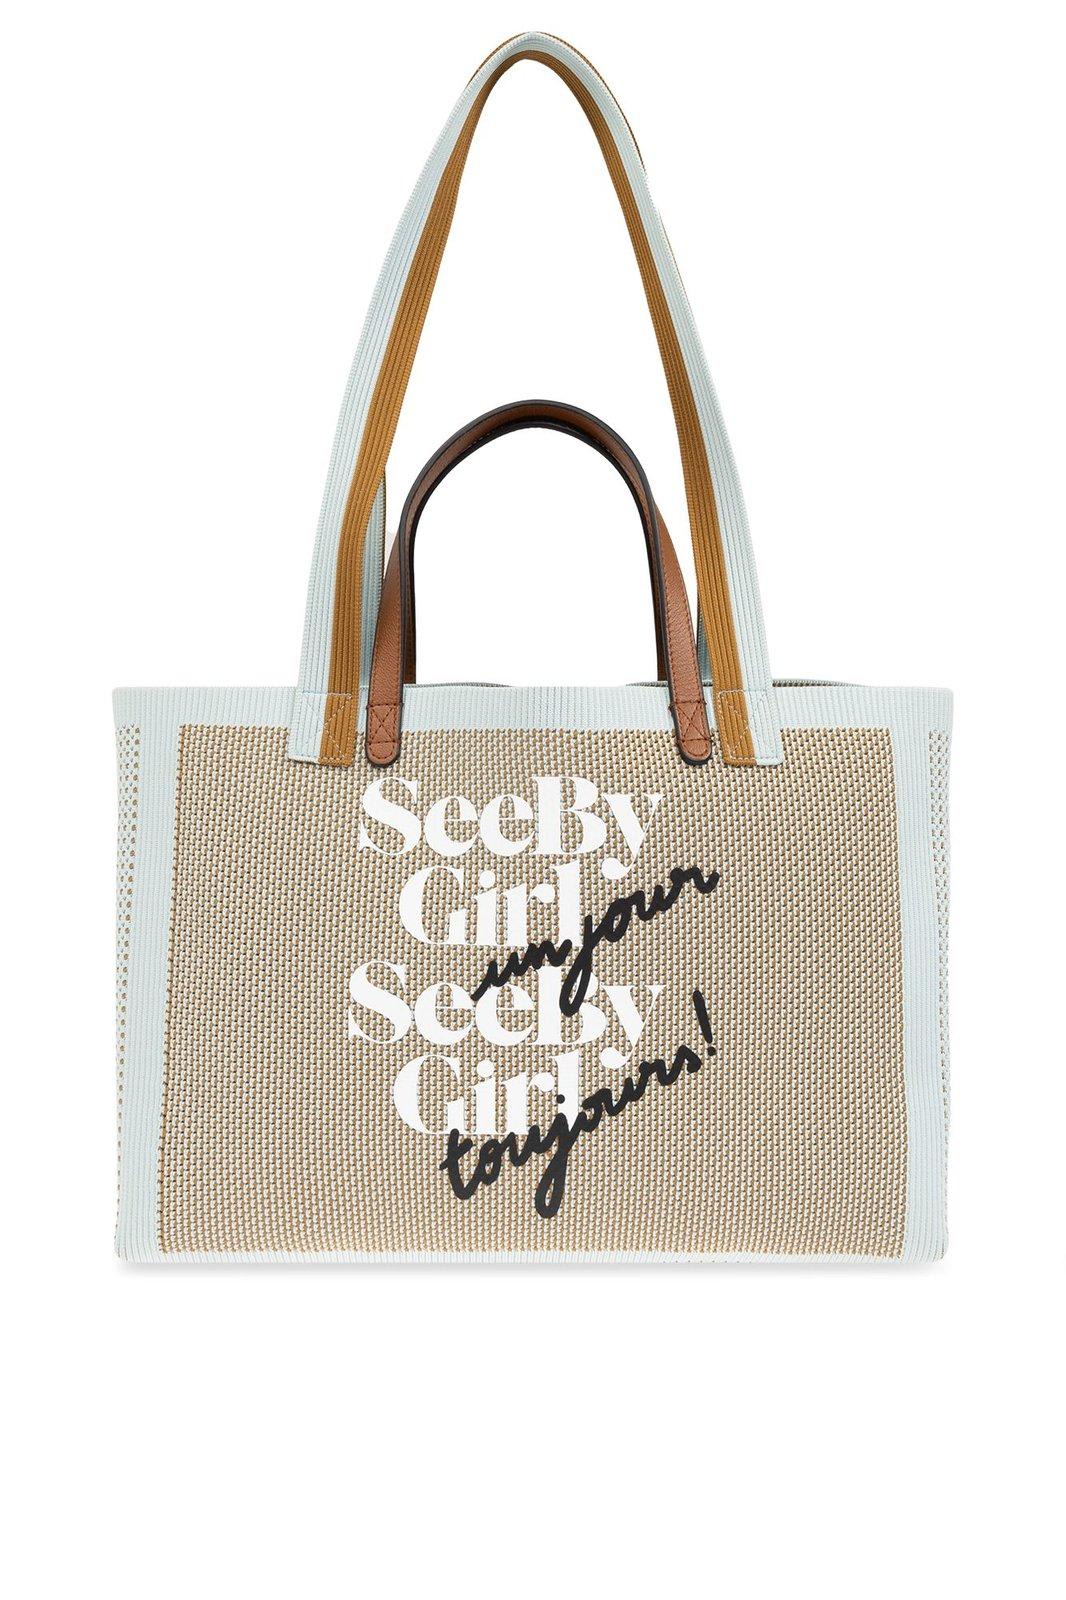 SEE BY CHLOÉ SEE BY GIRL UN JOUR TOTE BAG